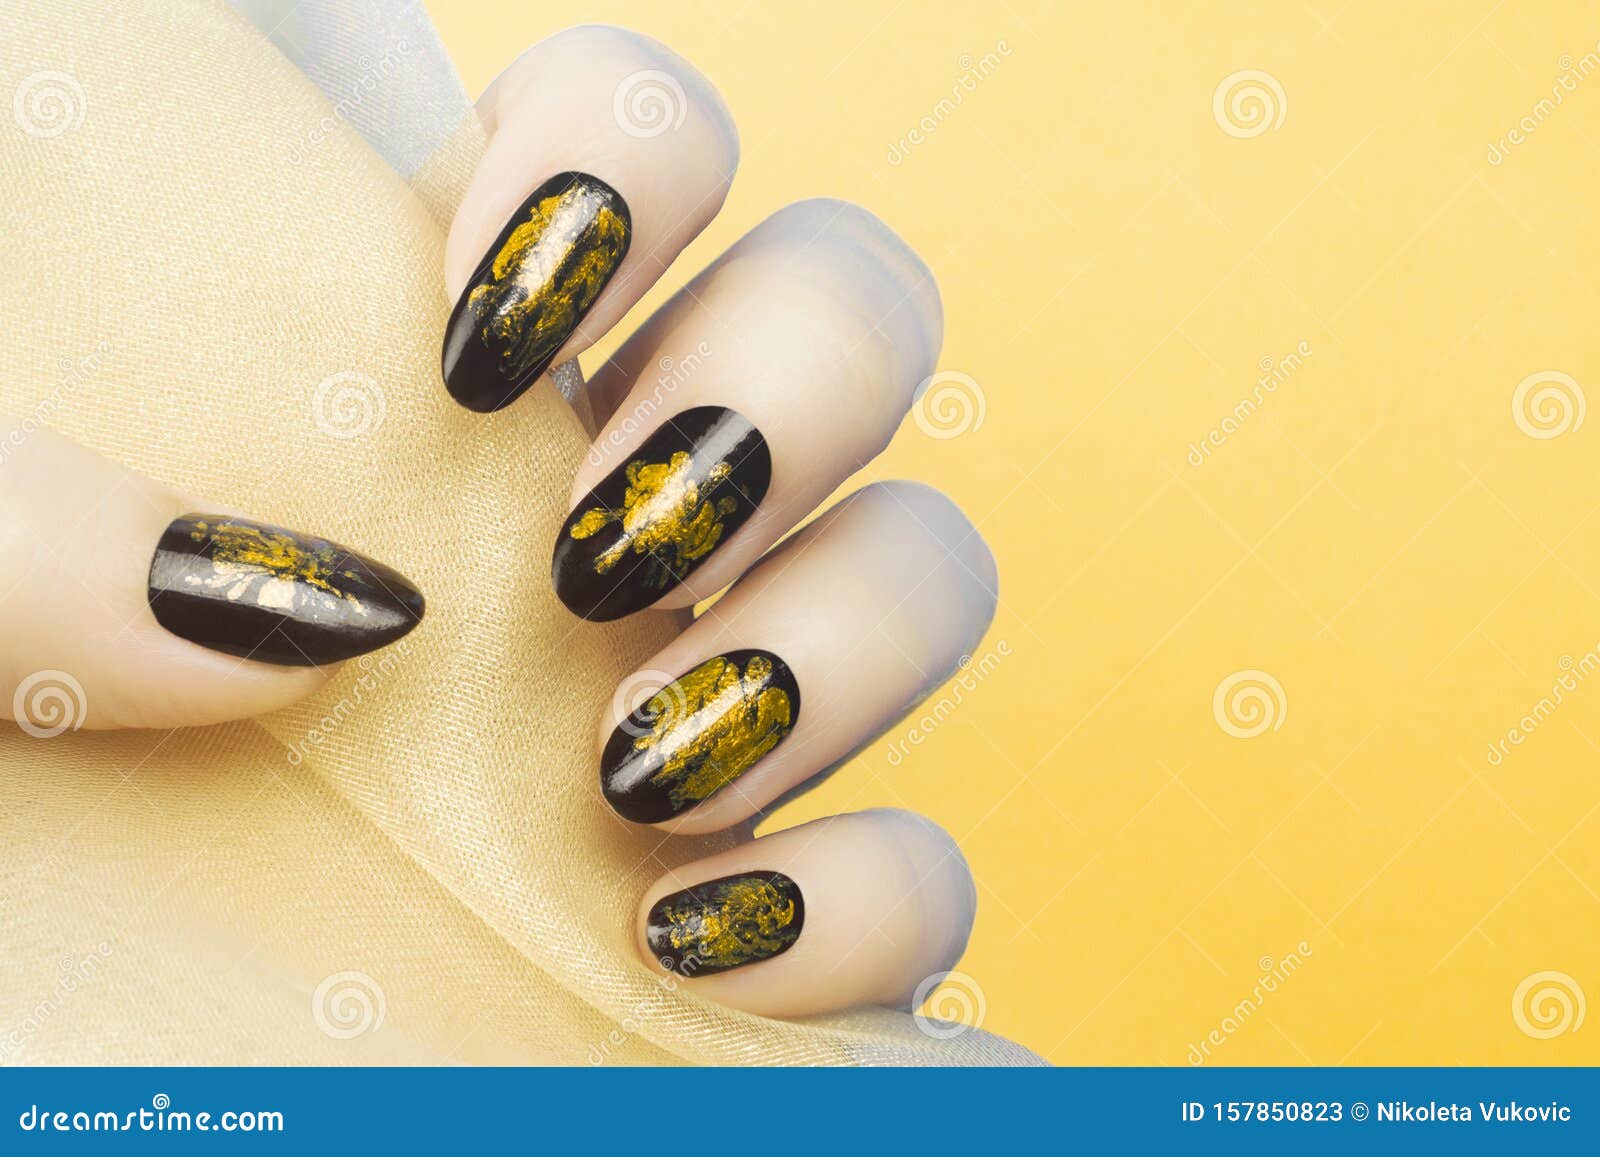 Best Summer Yellow Nails Designs - Selective Nails & Beauty Spa